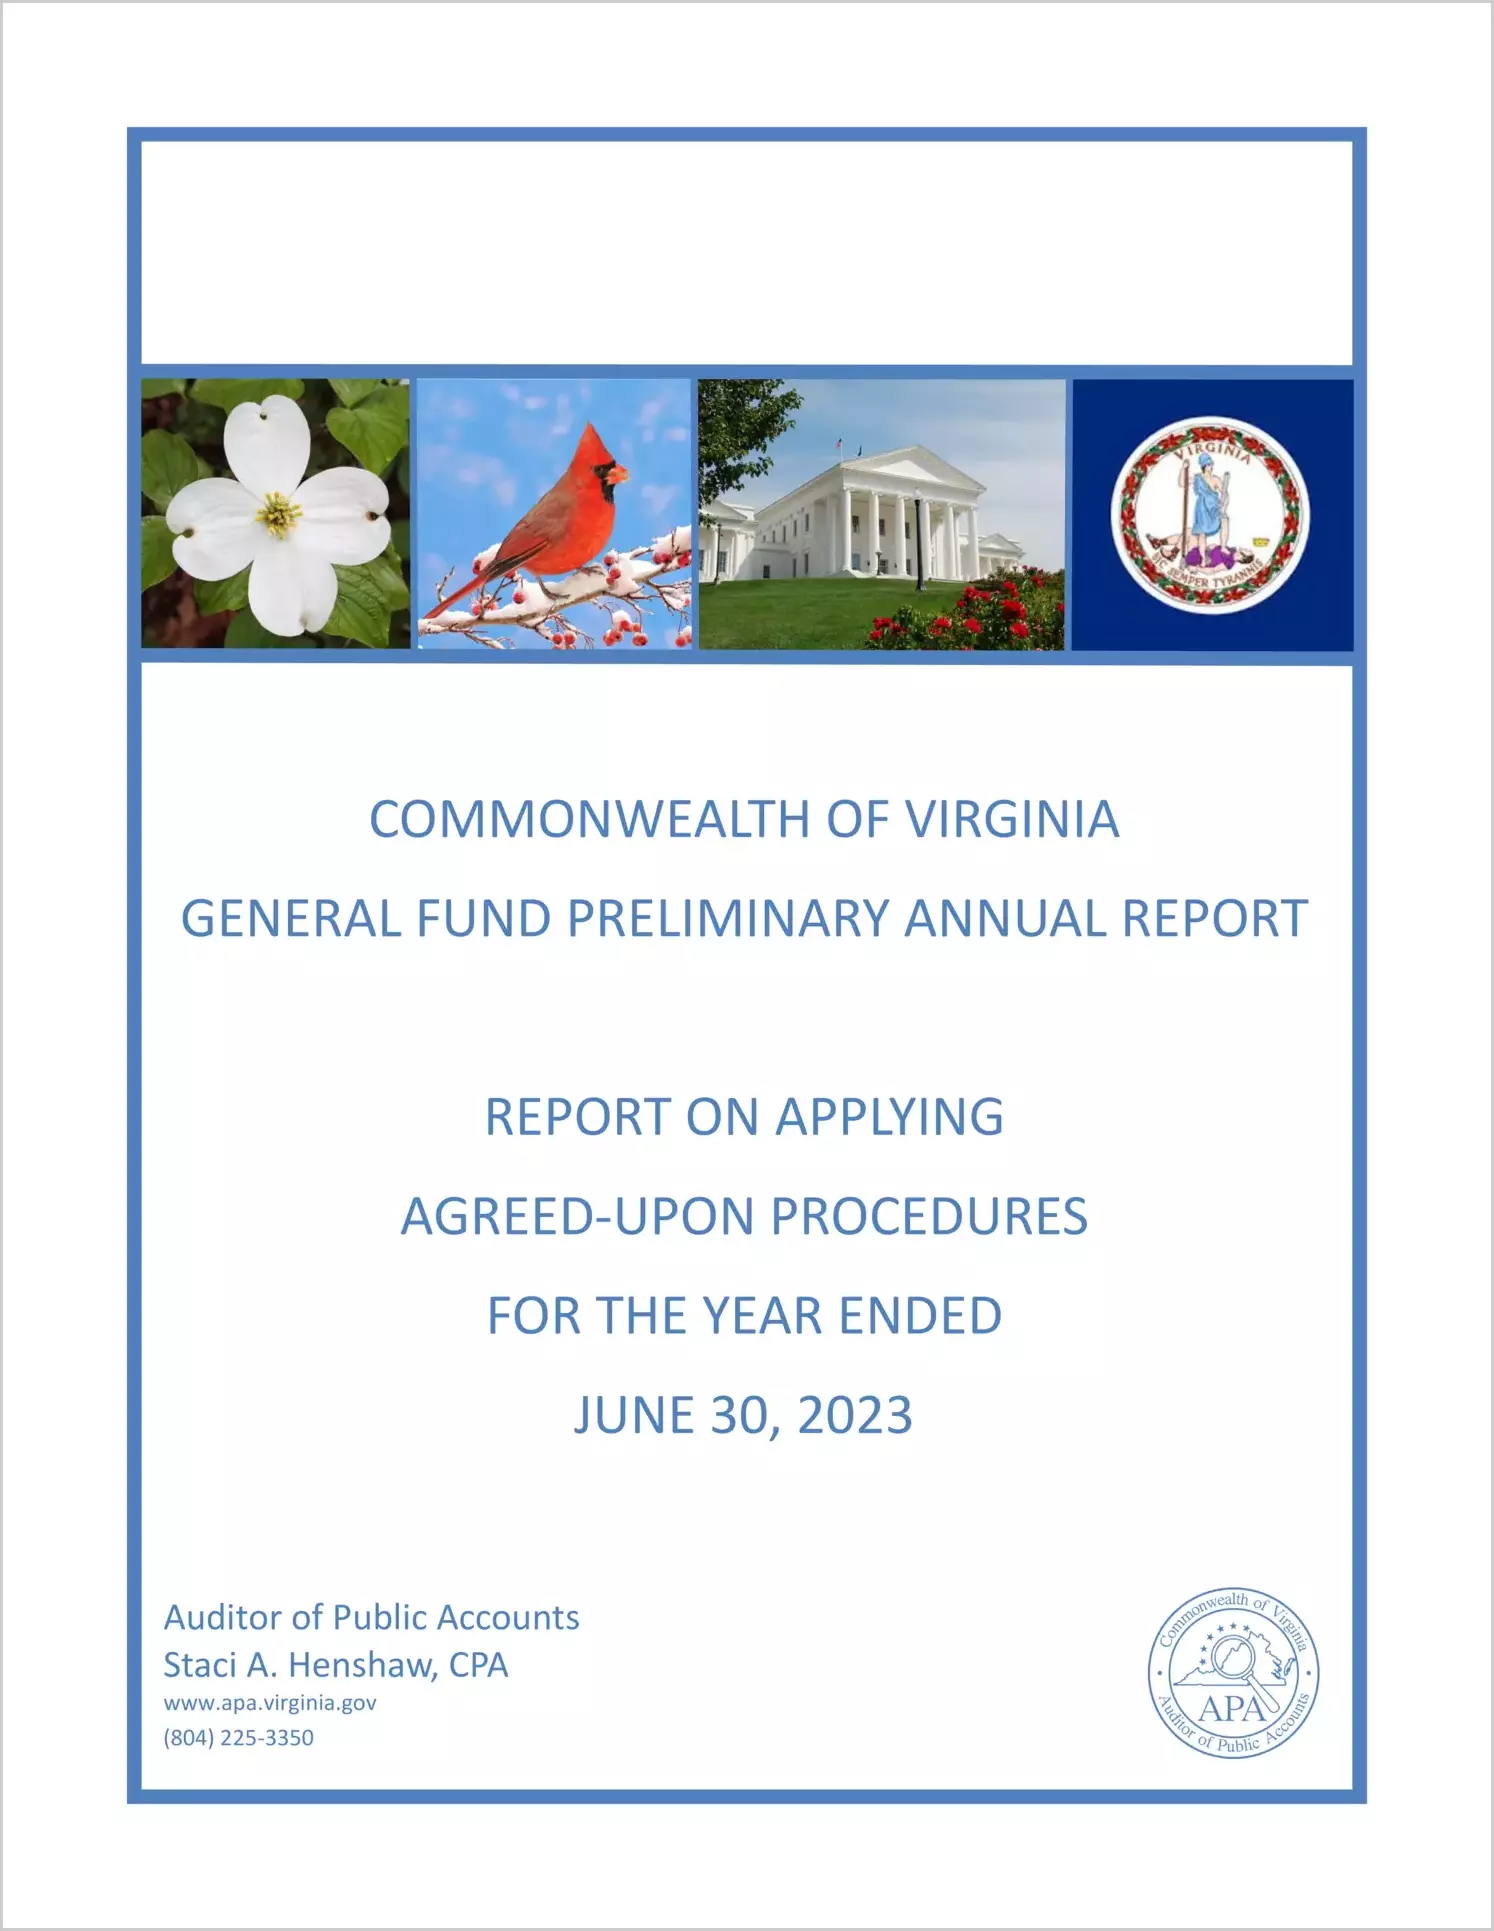 Commonwealth of Virginia General Fund Preliminary Annual Report for the year ended June 30, 2023